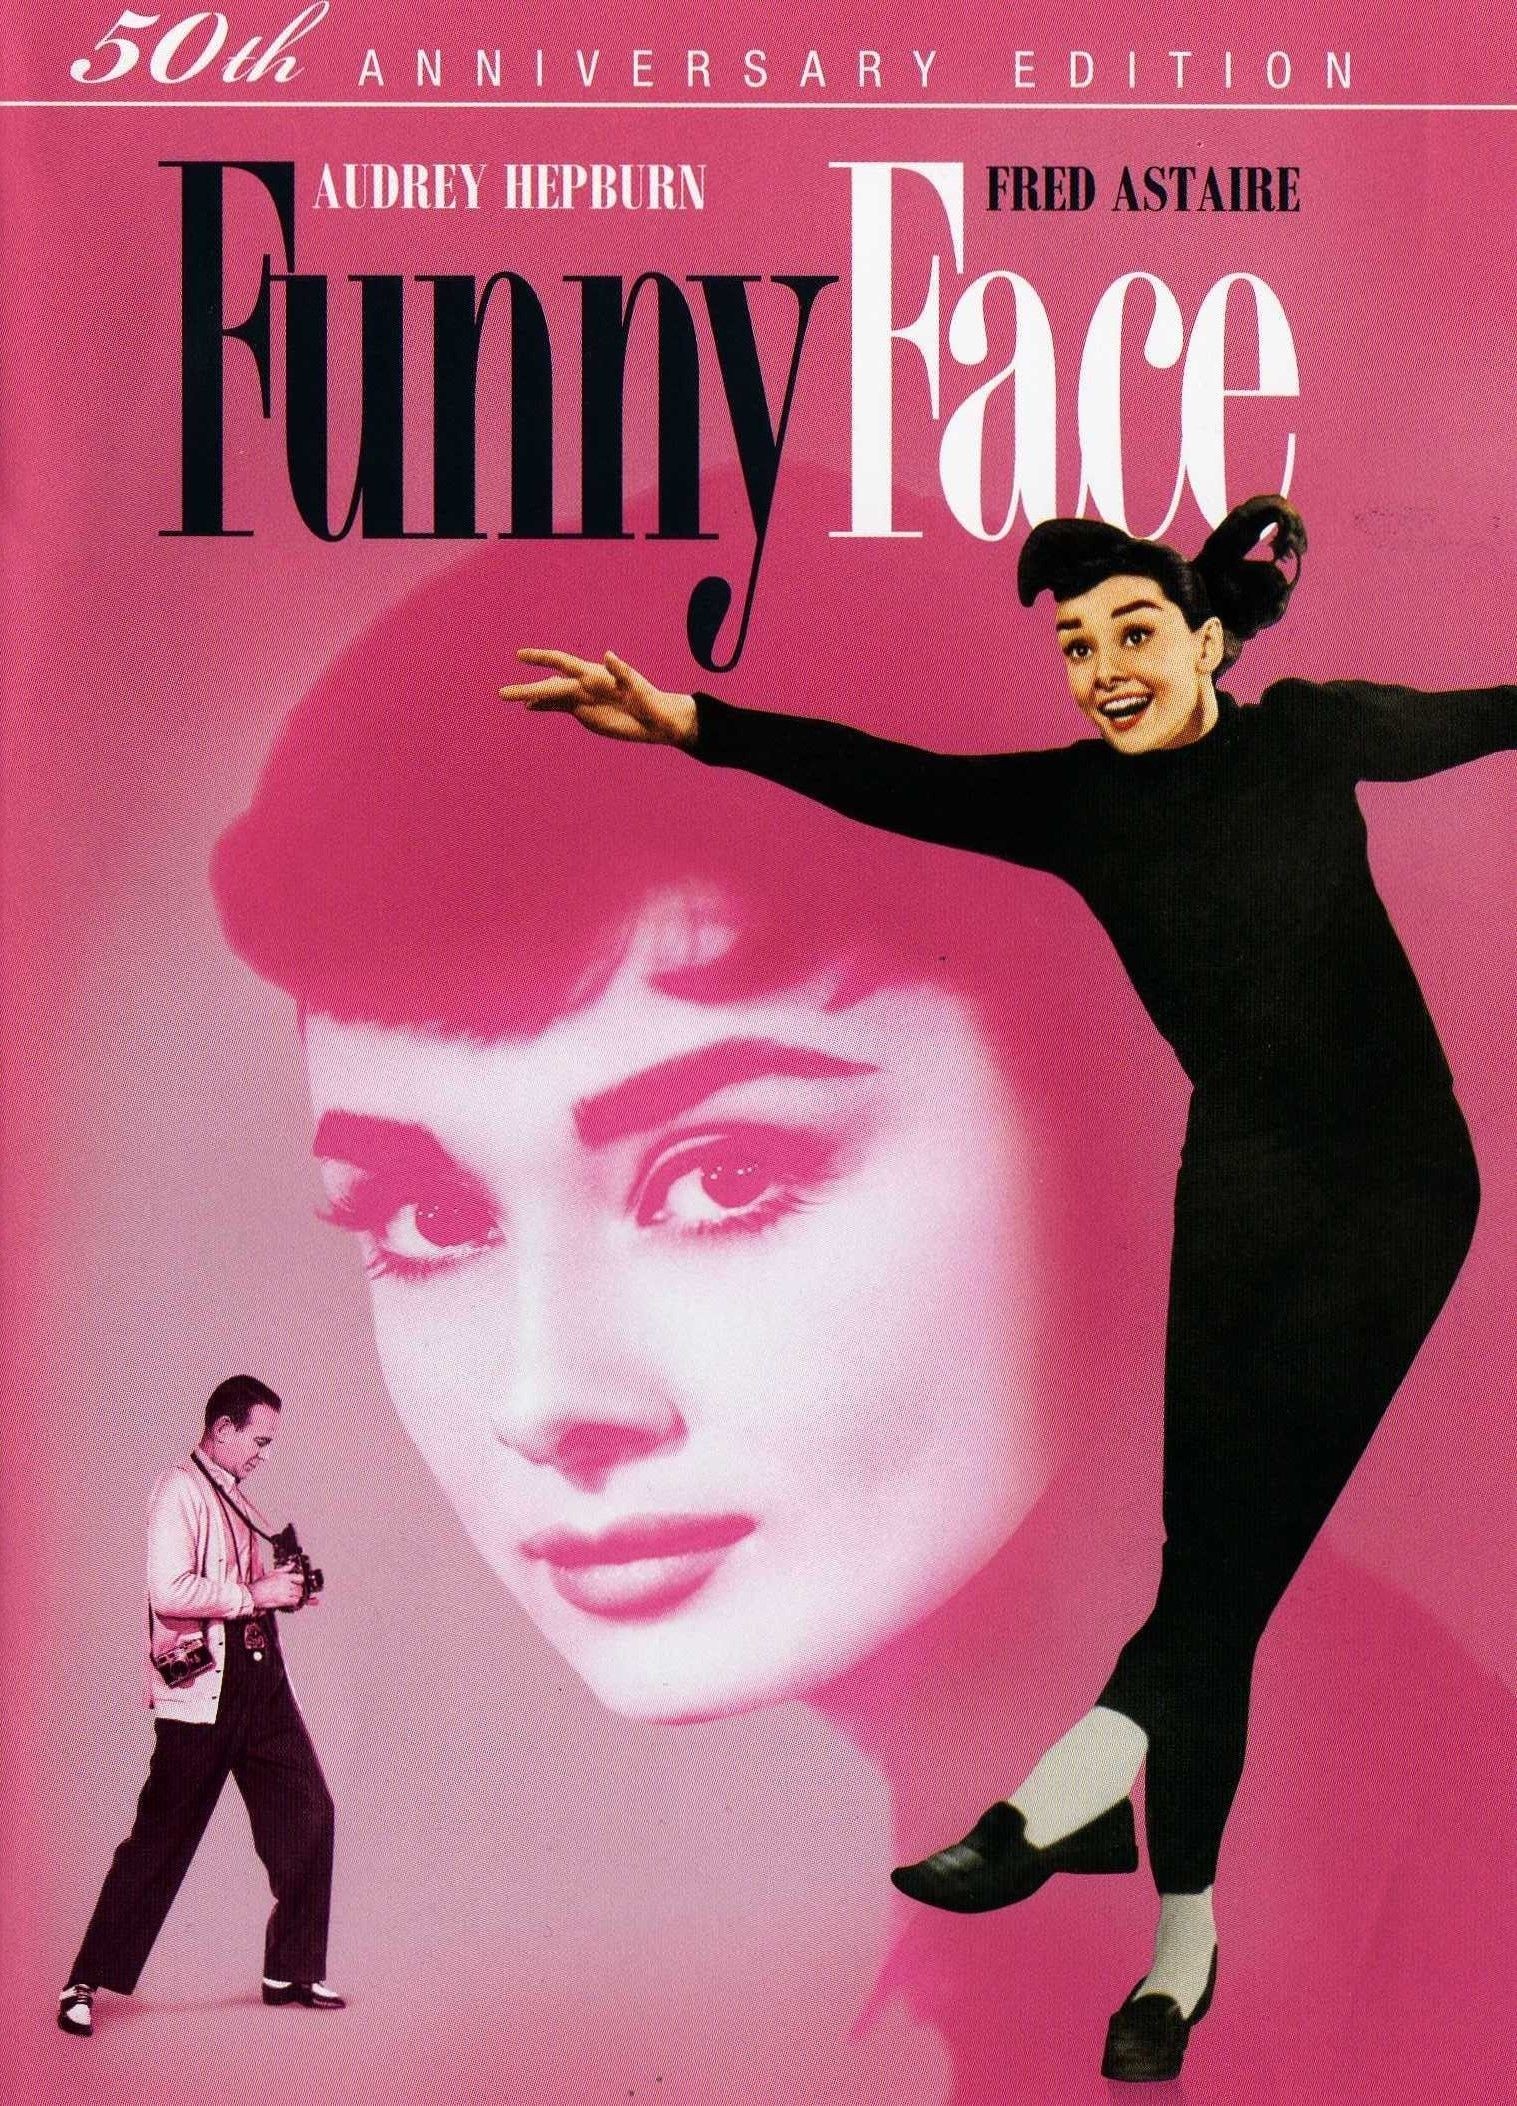 The fourth film is Funny face starring of course Audrey but also Fred ...